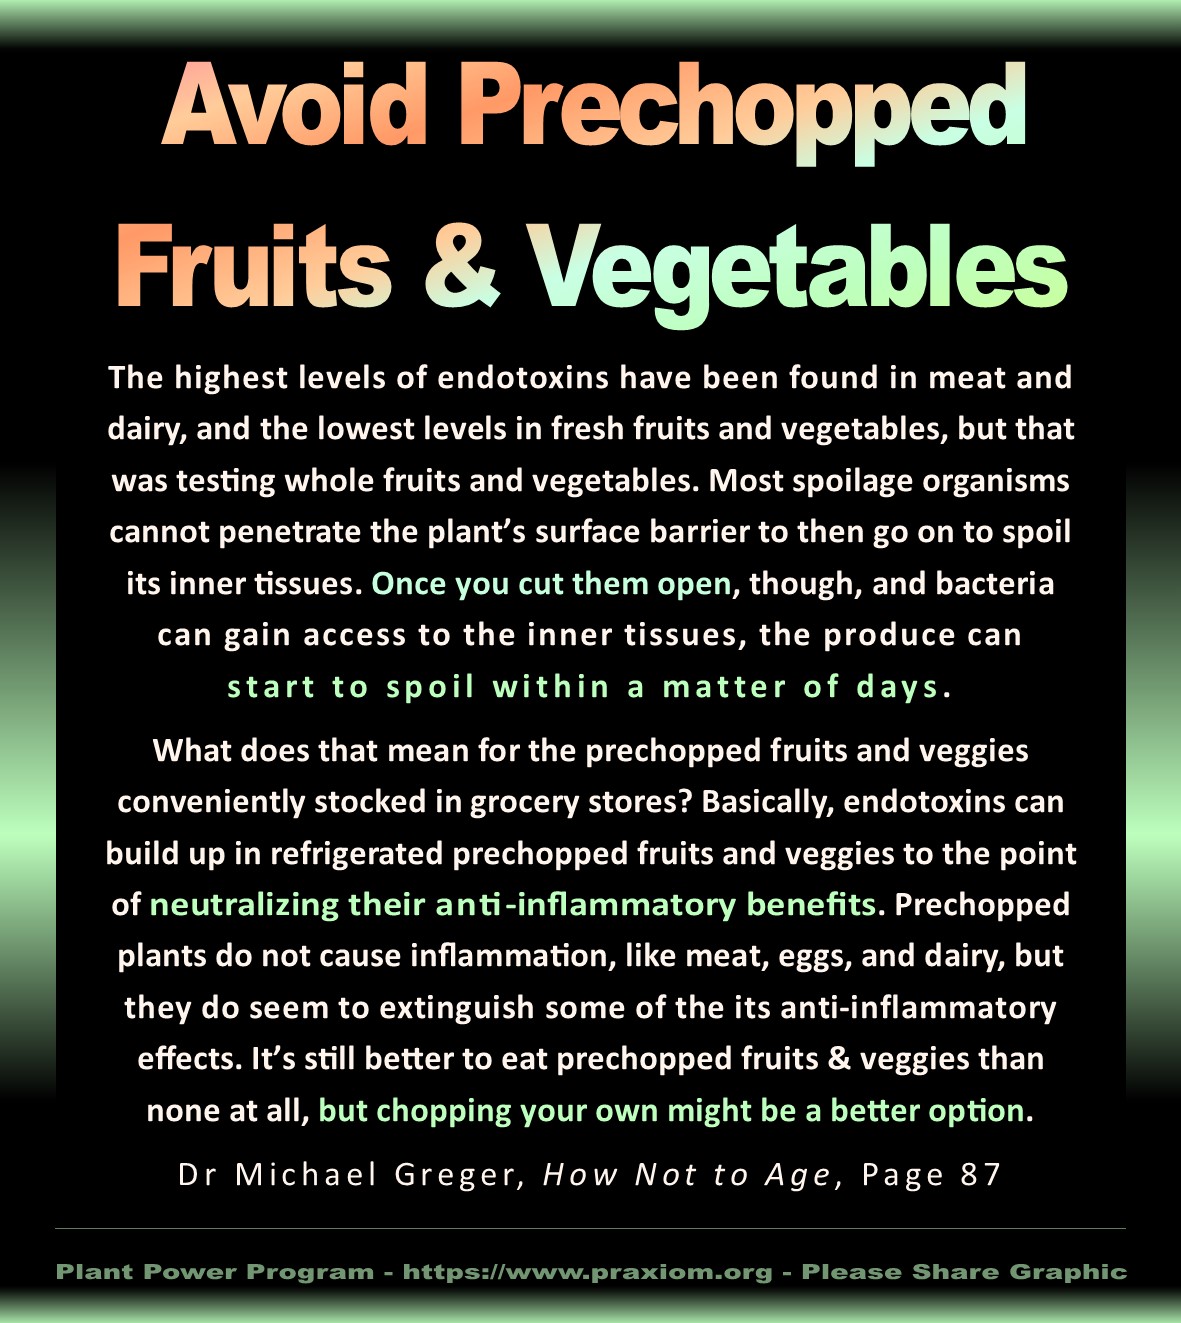 Avoid Prechopped Fruits and Veggies - Dr Michael Greger